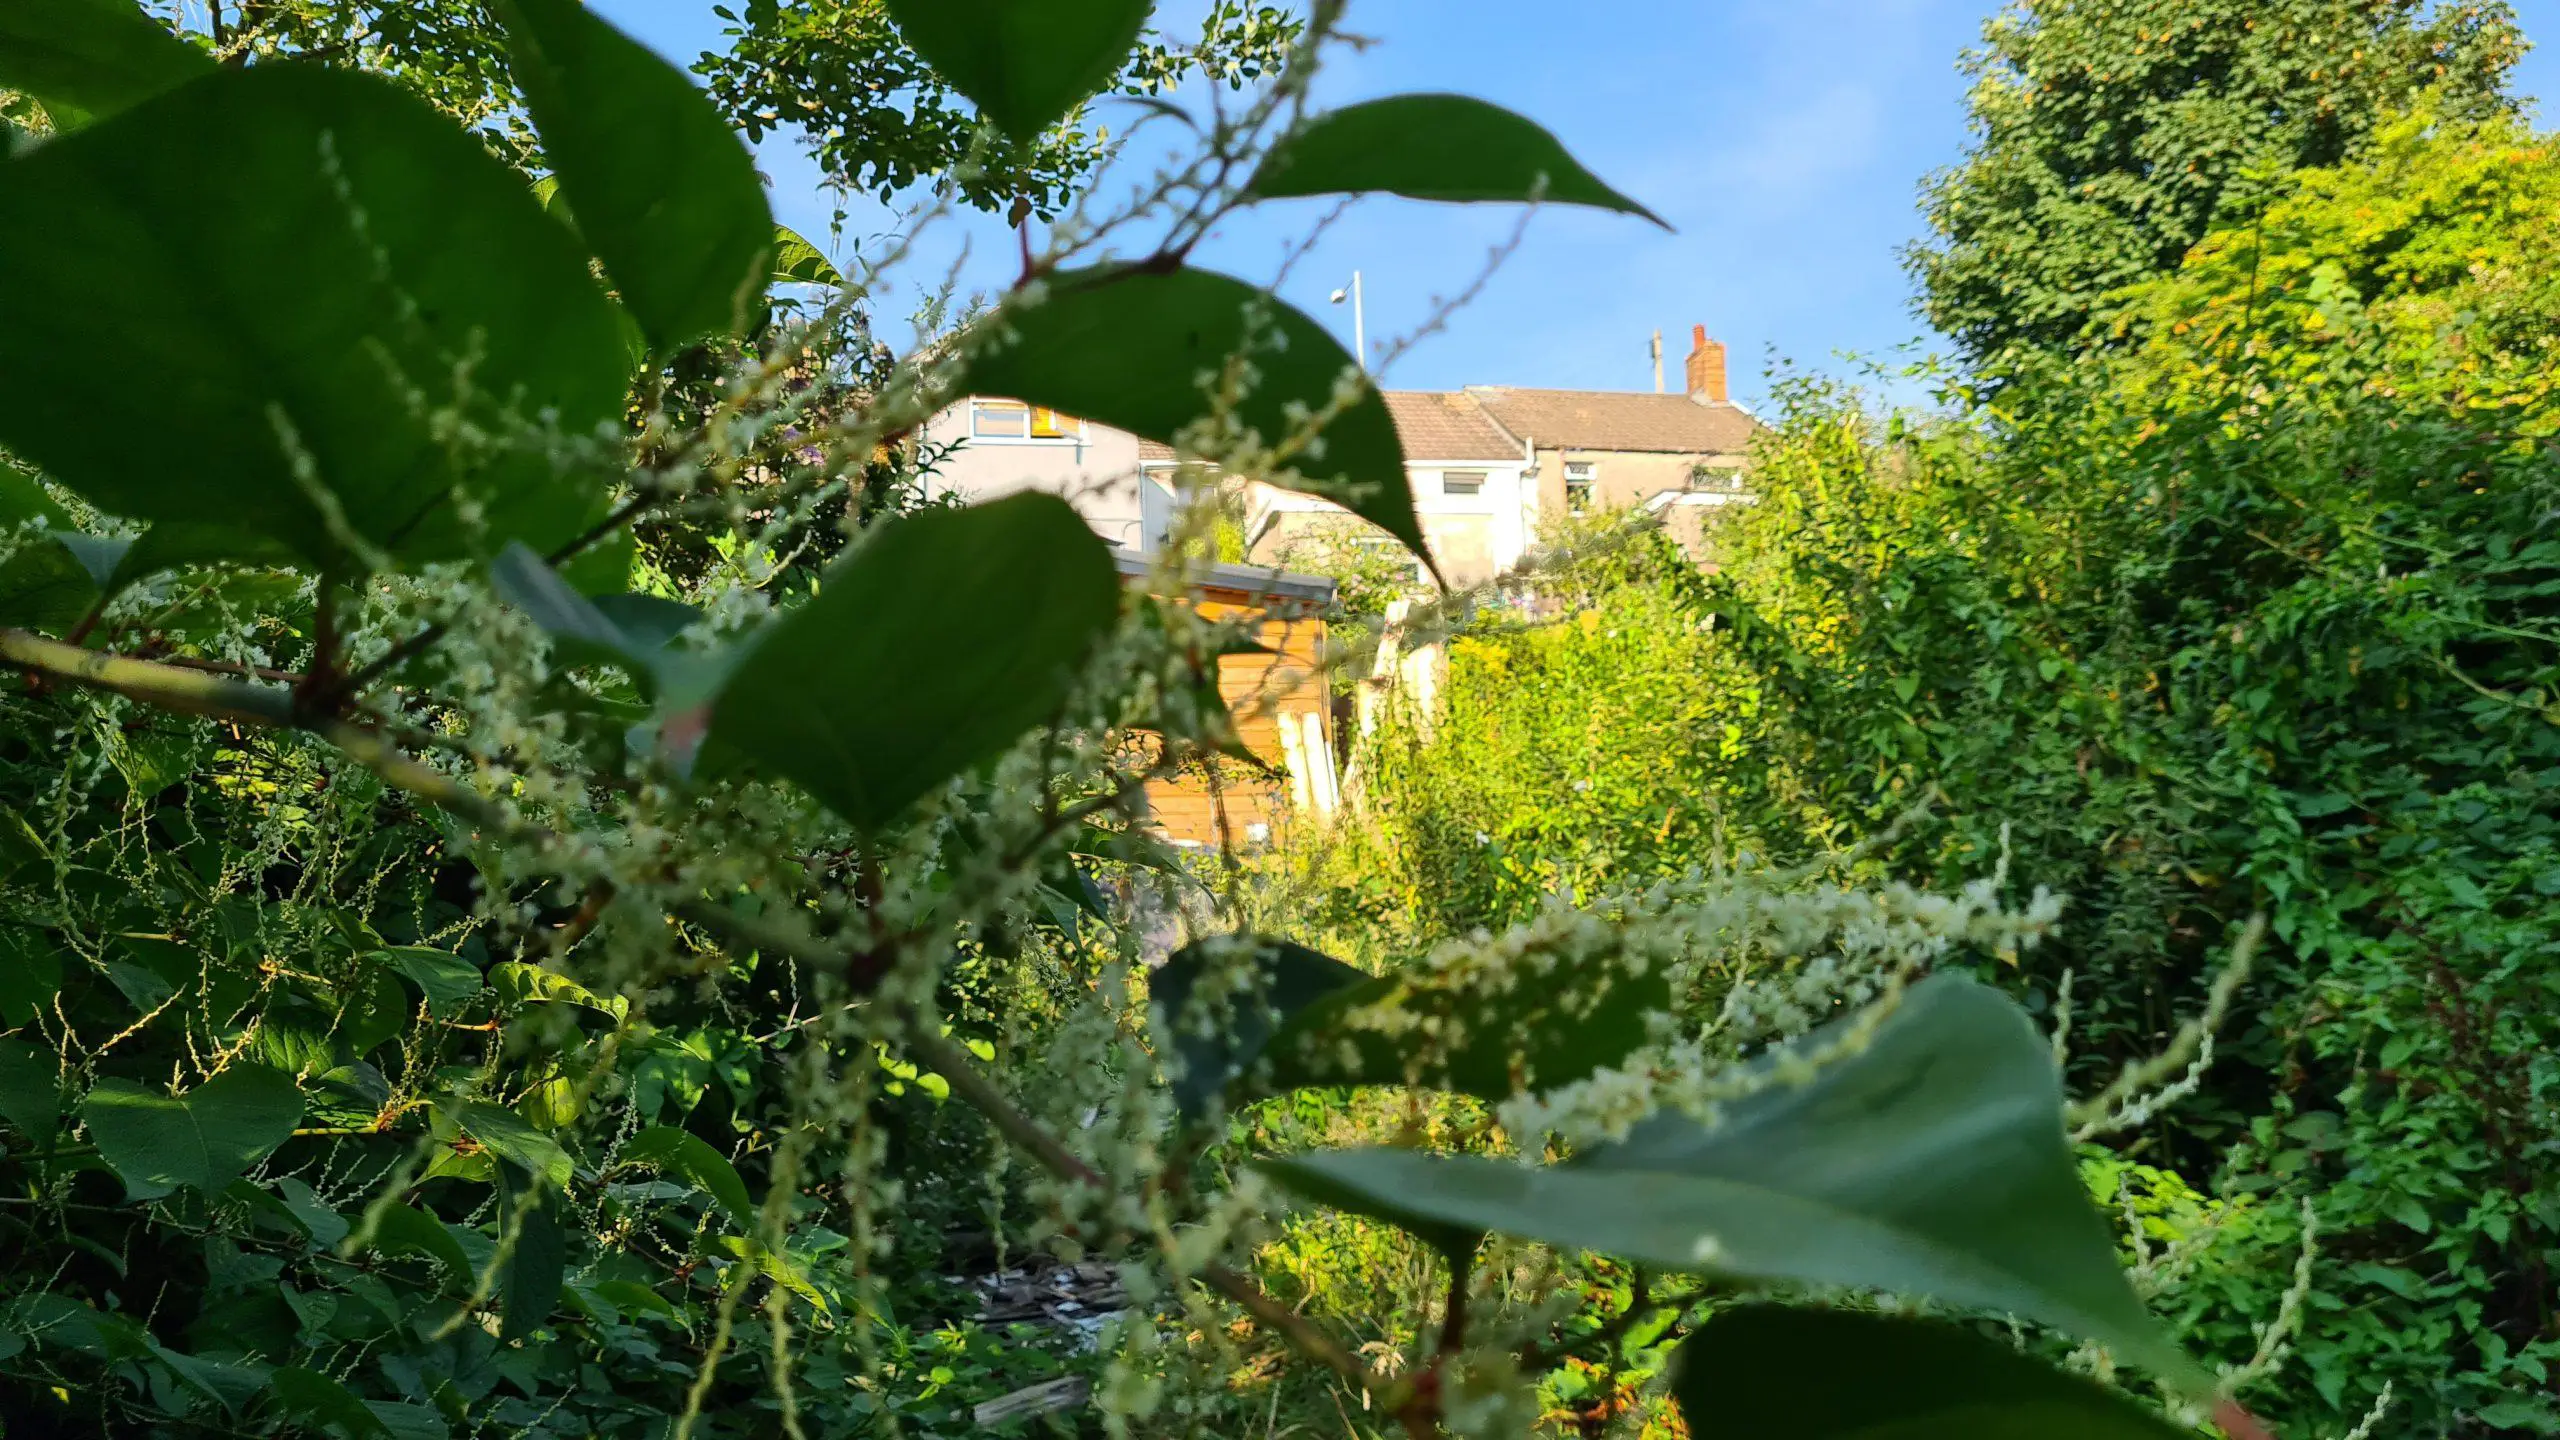 As an invasive plant Japanese knotweed robs homeowners of their garden and yards